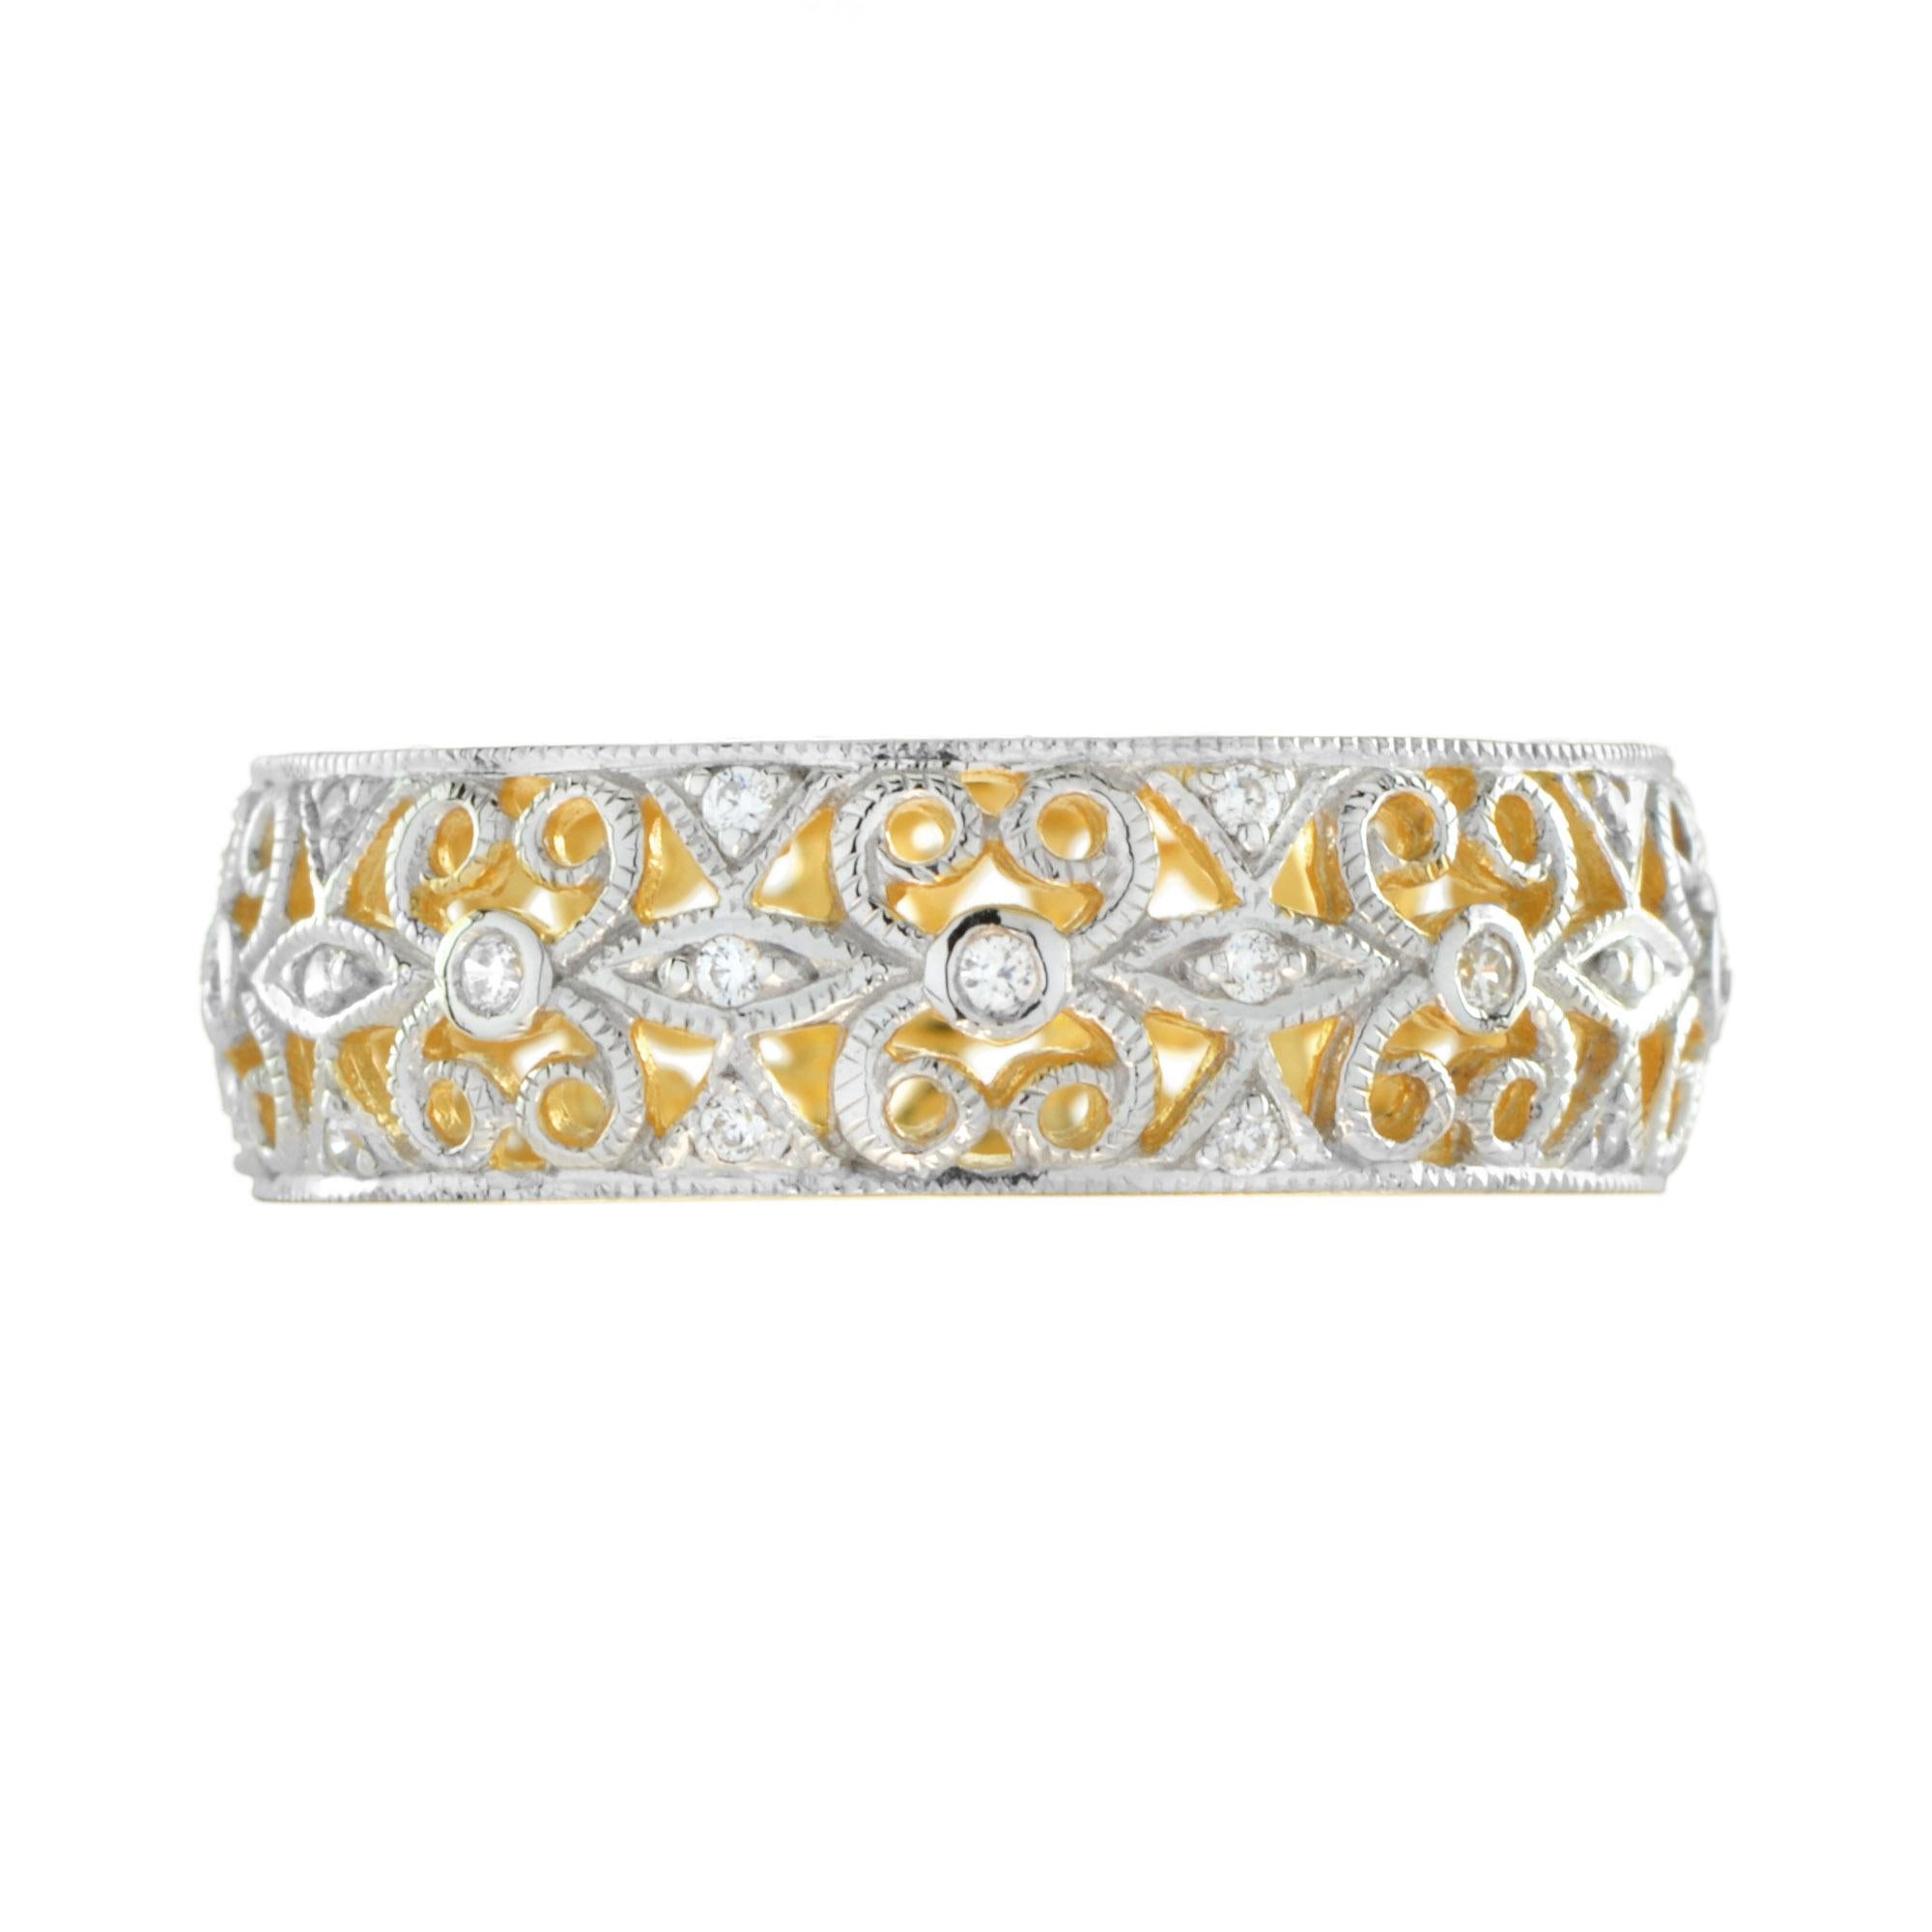 For Sale:  Art Deco Style Diamond Floral Filigree Eternity Band Ring in 14K Yellow Gold 2